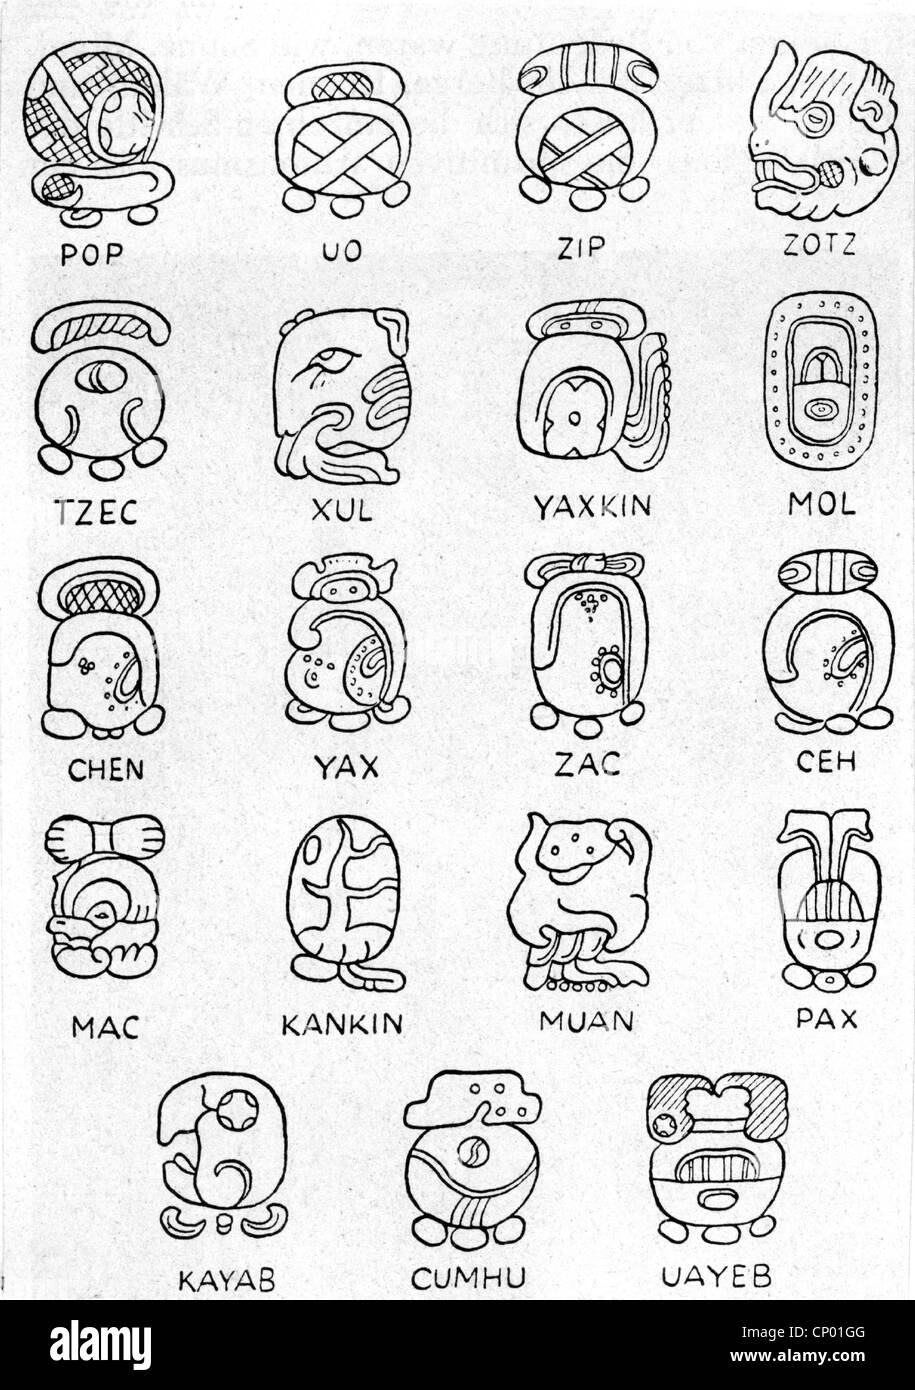 writing, script, South America, Maya, month symbols of the Maya, (according to J.E. Thompson/Civilization of the Mayas, 1927), character, characters, sign, signs, pictography, tonalamatl, alamatl, pictogram, pictograph, pictograms, pictographs, hieroglyph, hieroglyphs, hieroglyphics, Maya, Mayan culture, South American, month, months, calendar, calendars, historic, historical, 1920s, 20th century, Additional-Rights-Clearences-Not Available Stock Photo